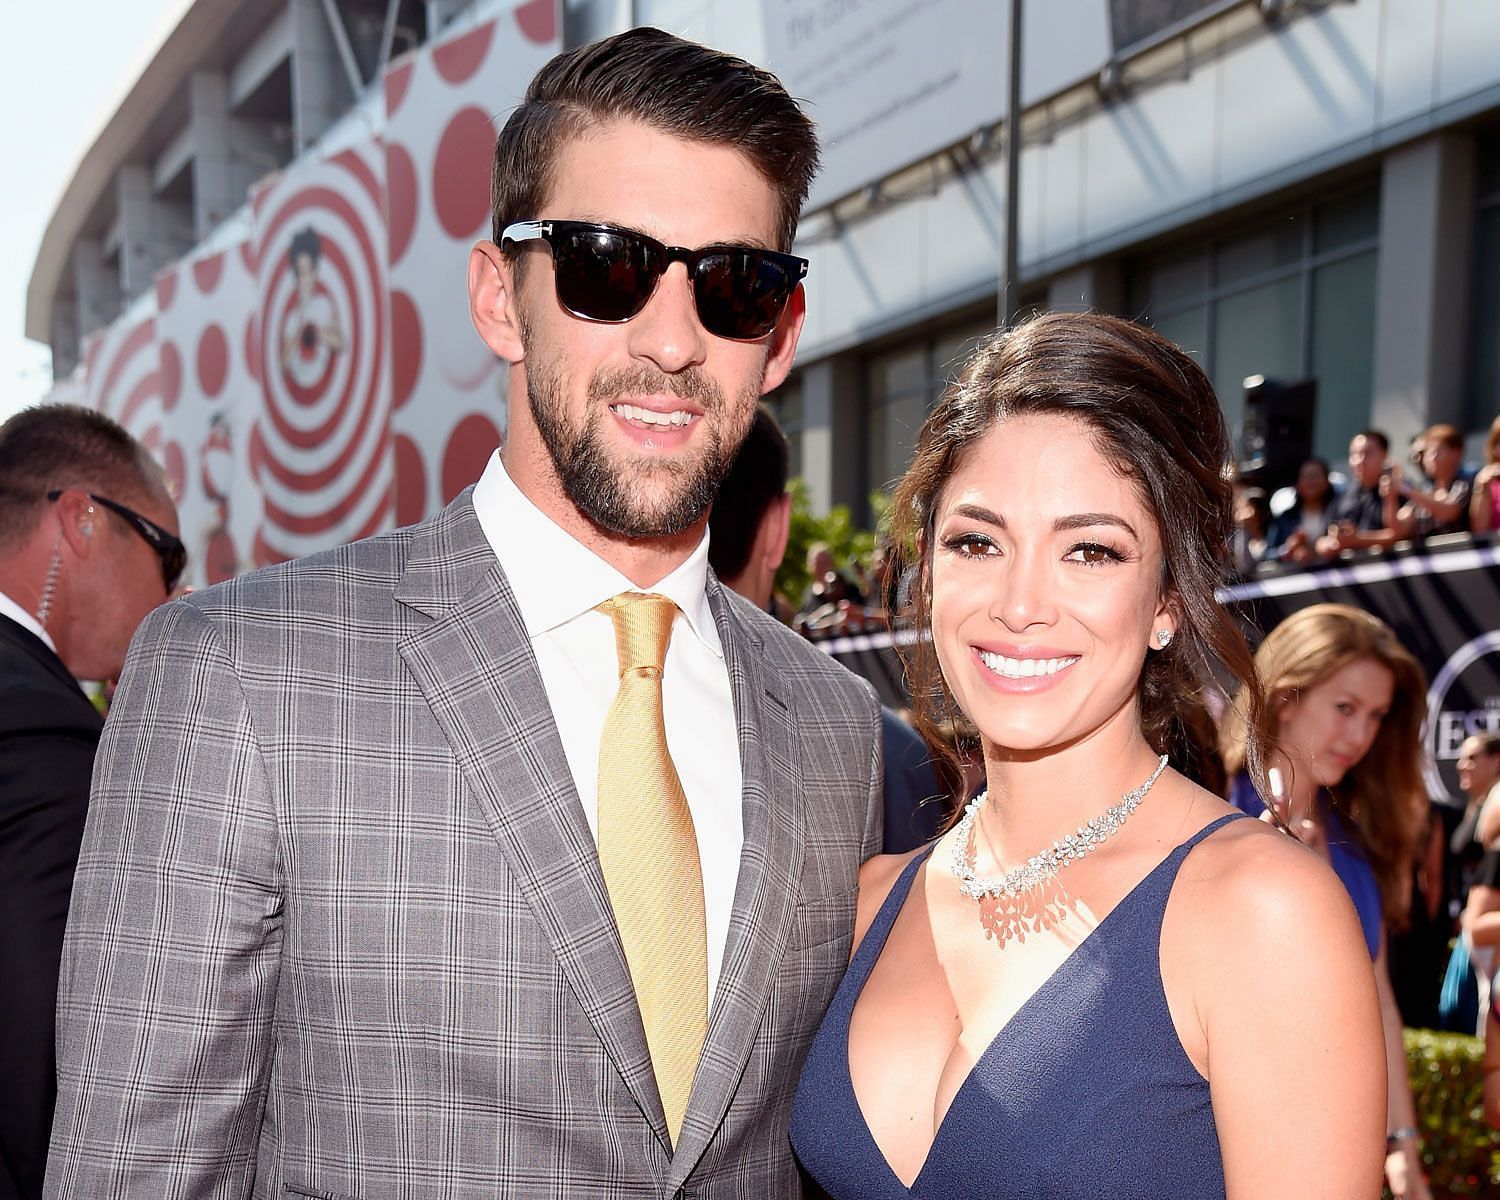 Michael Phelps and his wife (Image via The Knot)